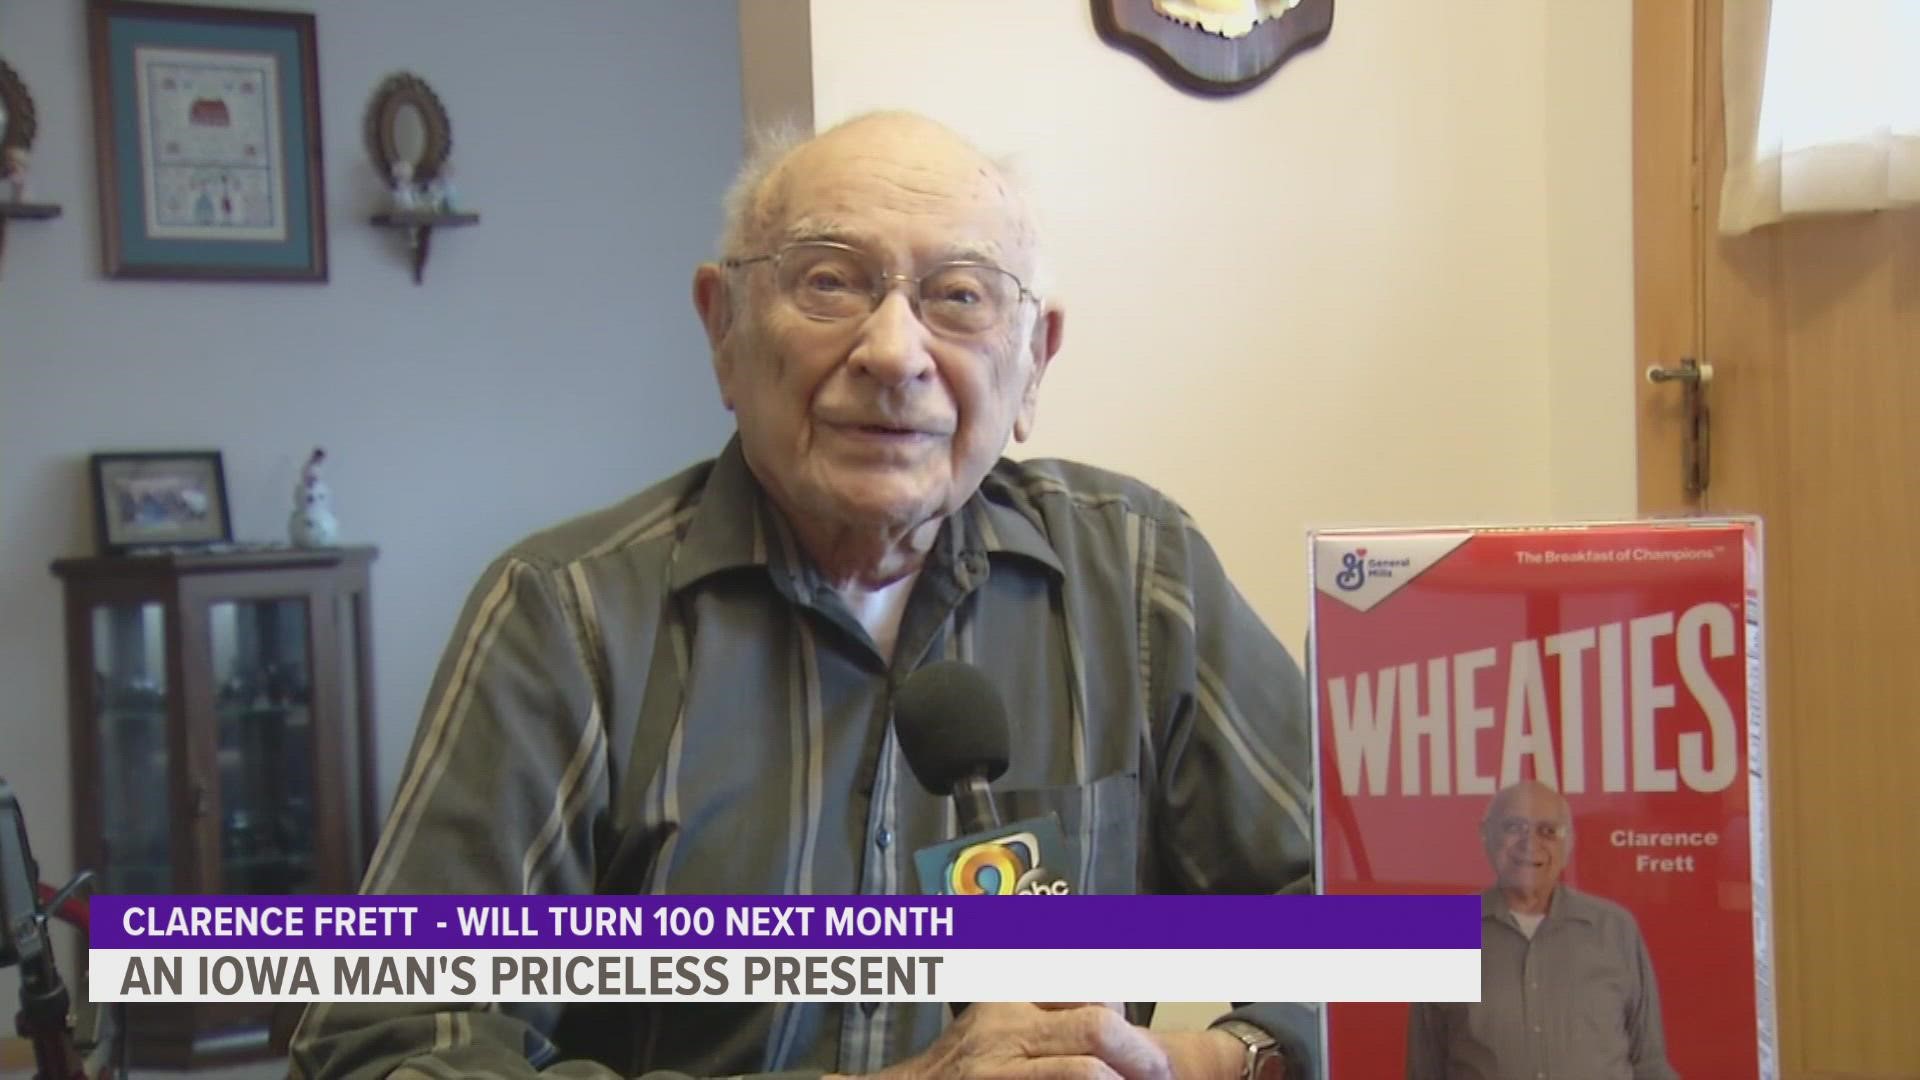 99-year-old Clarence Frett has been eating Wheaties for breakfast every day since 1943.